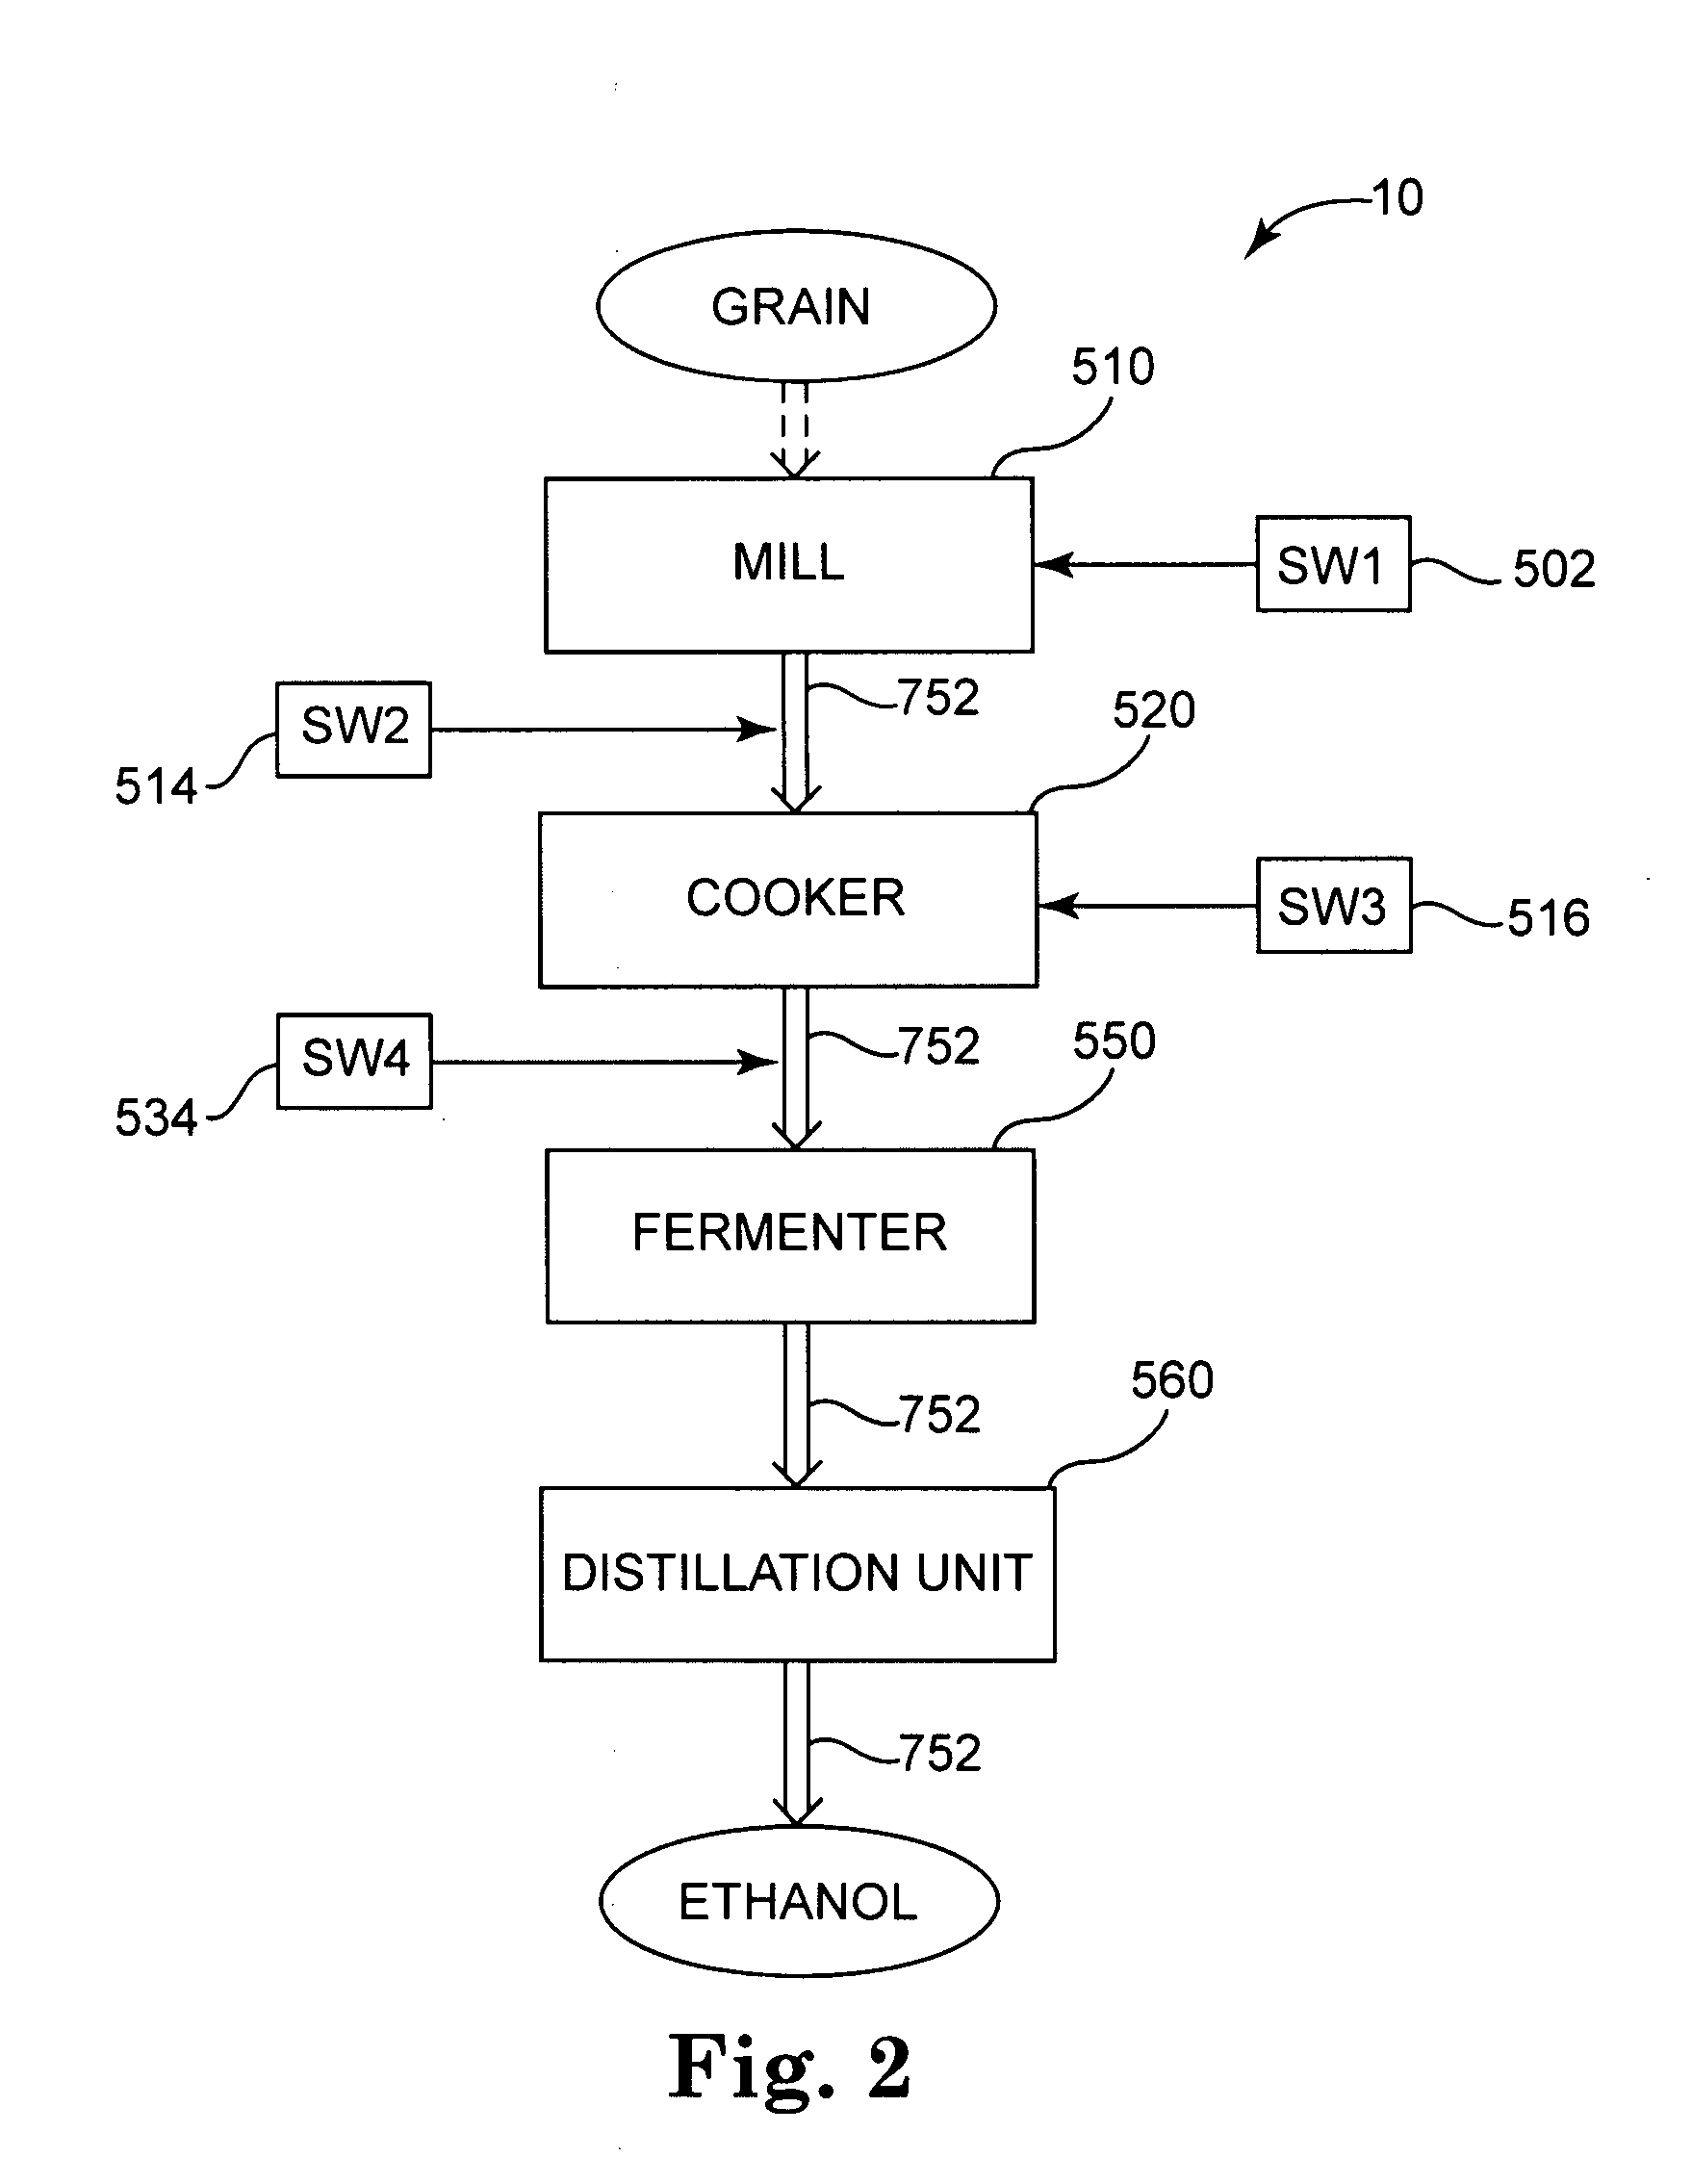 Apparatus and methods for ethanol production